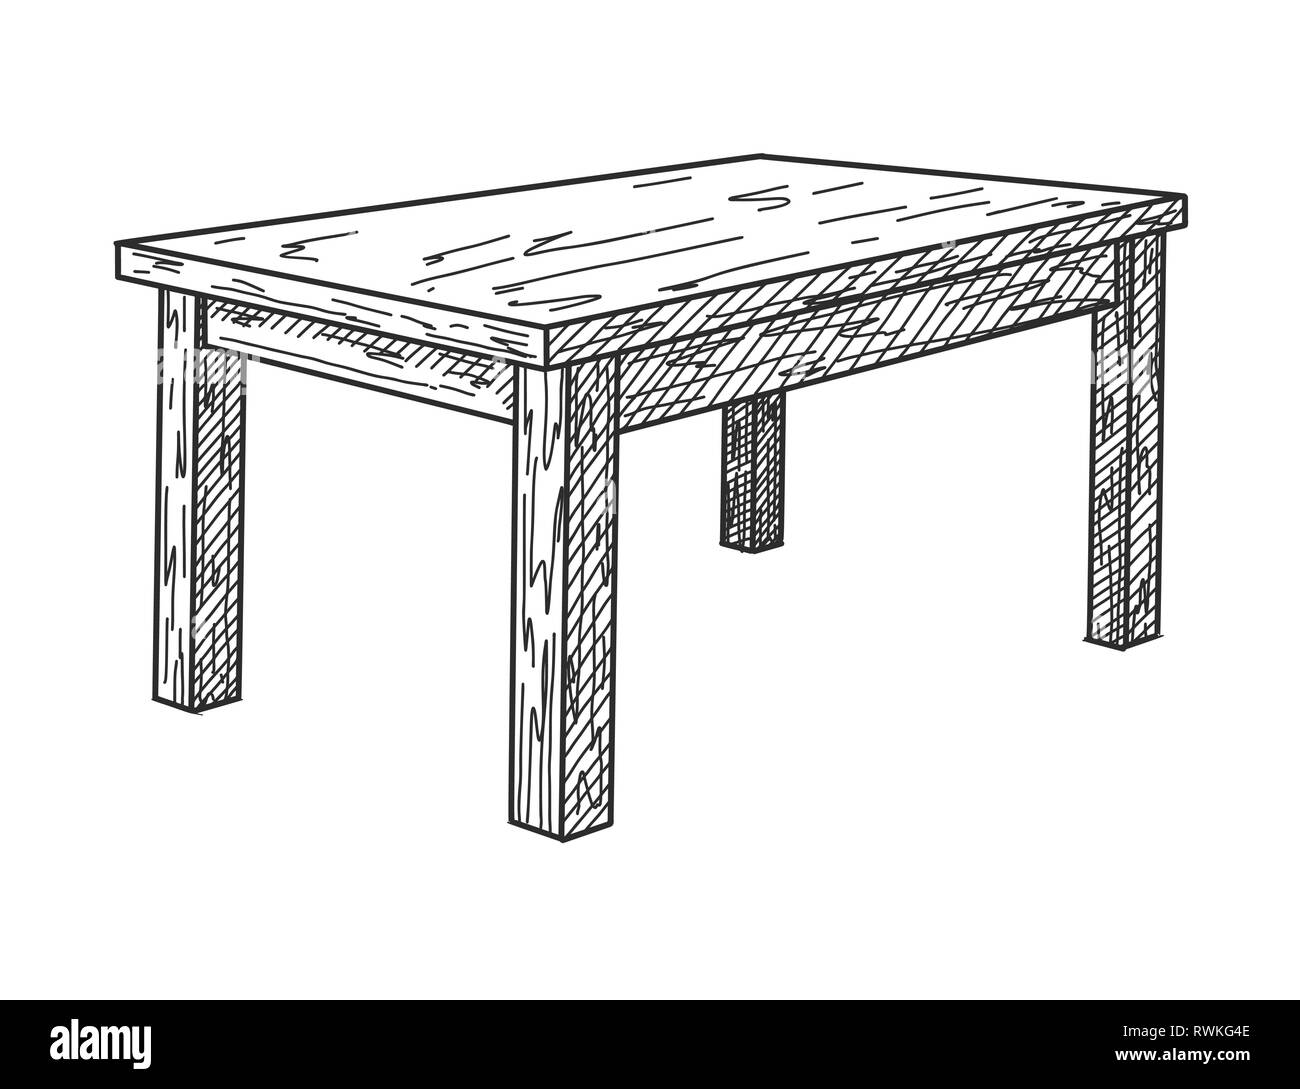 Realistic Sketch Of The Table In Perspective Vector Illustration